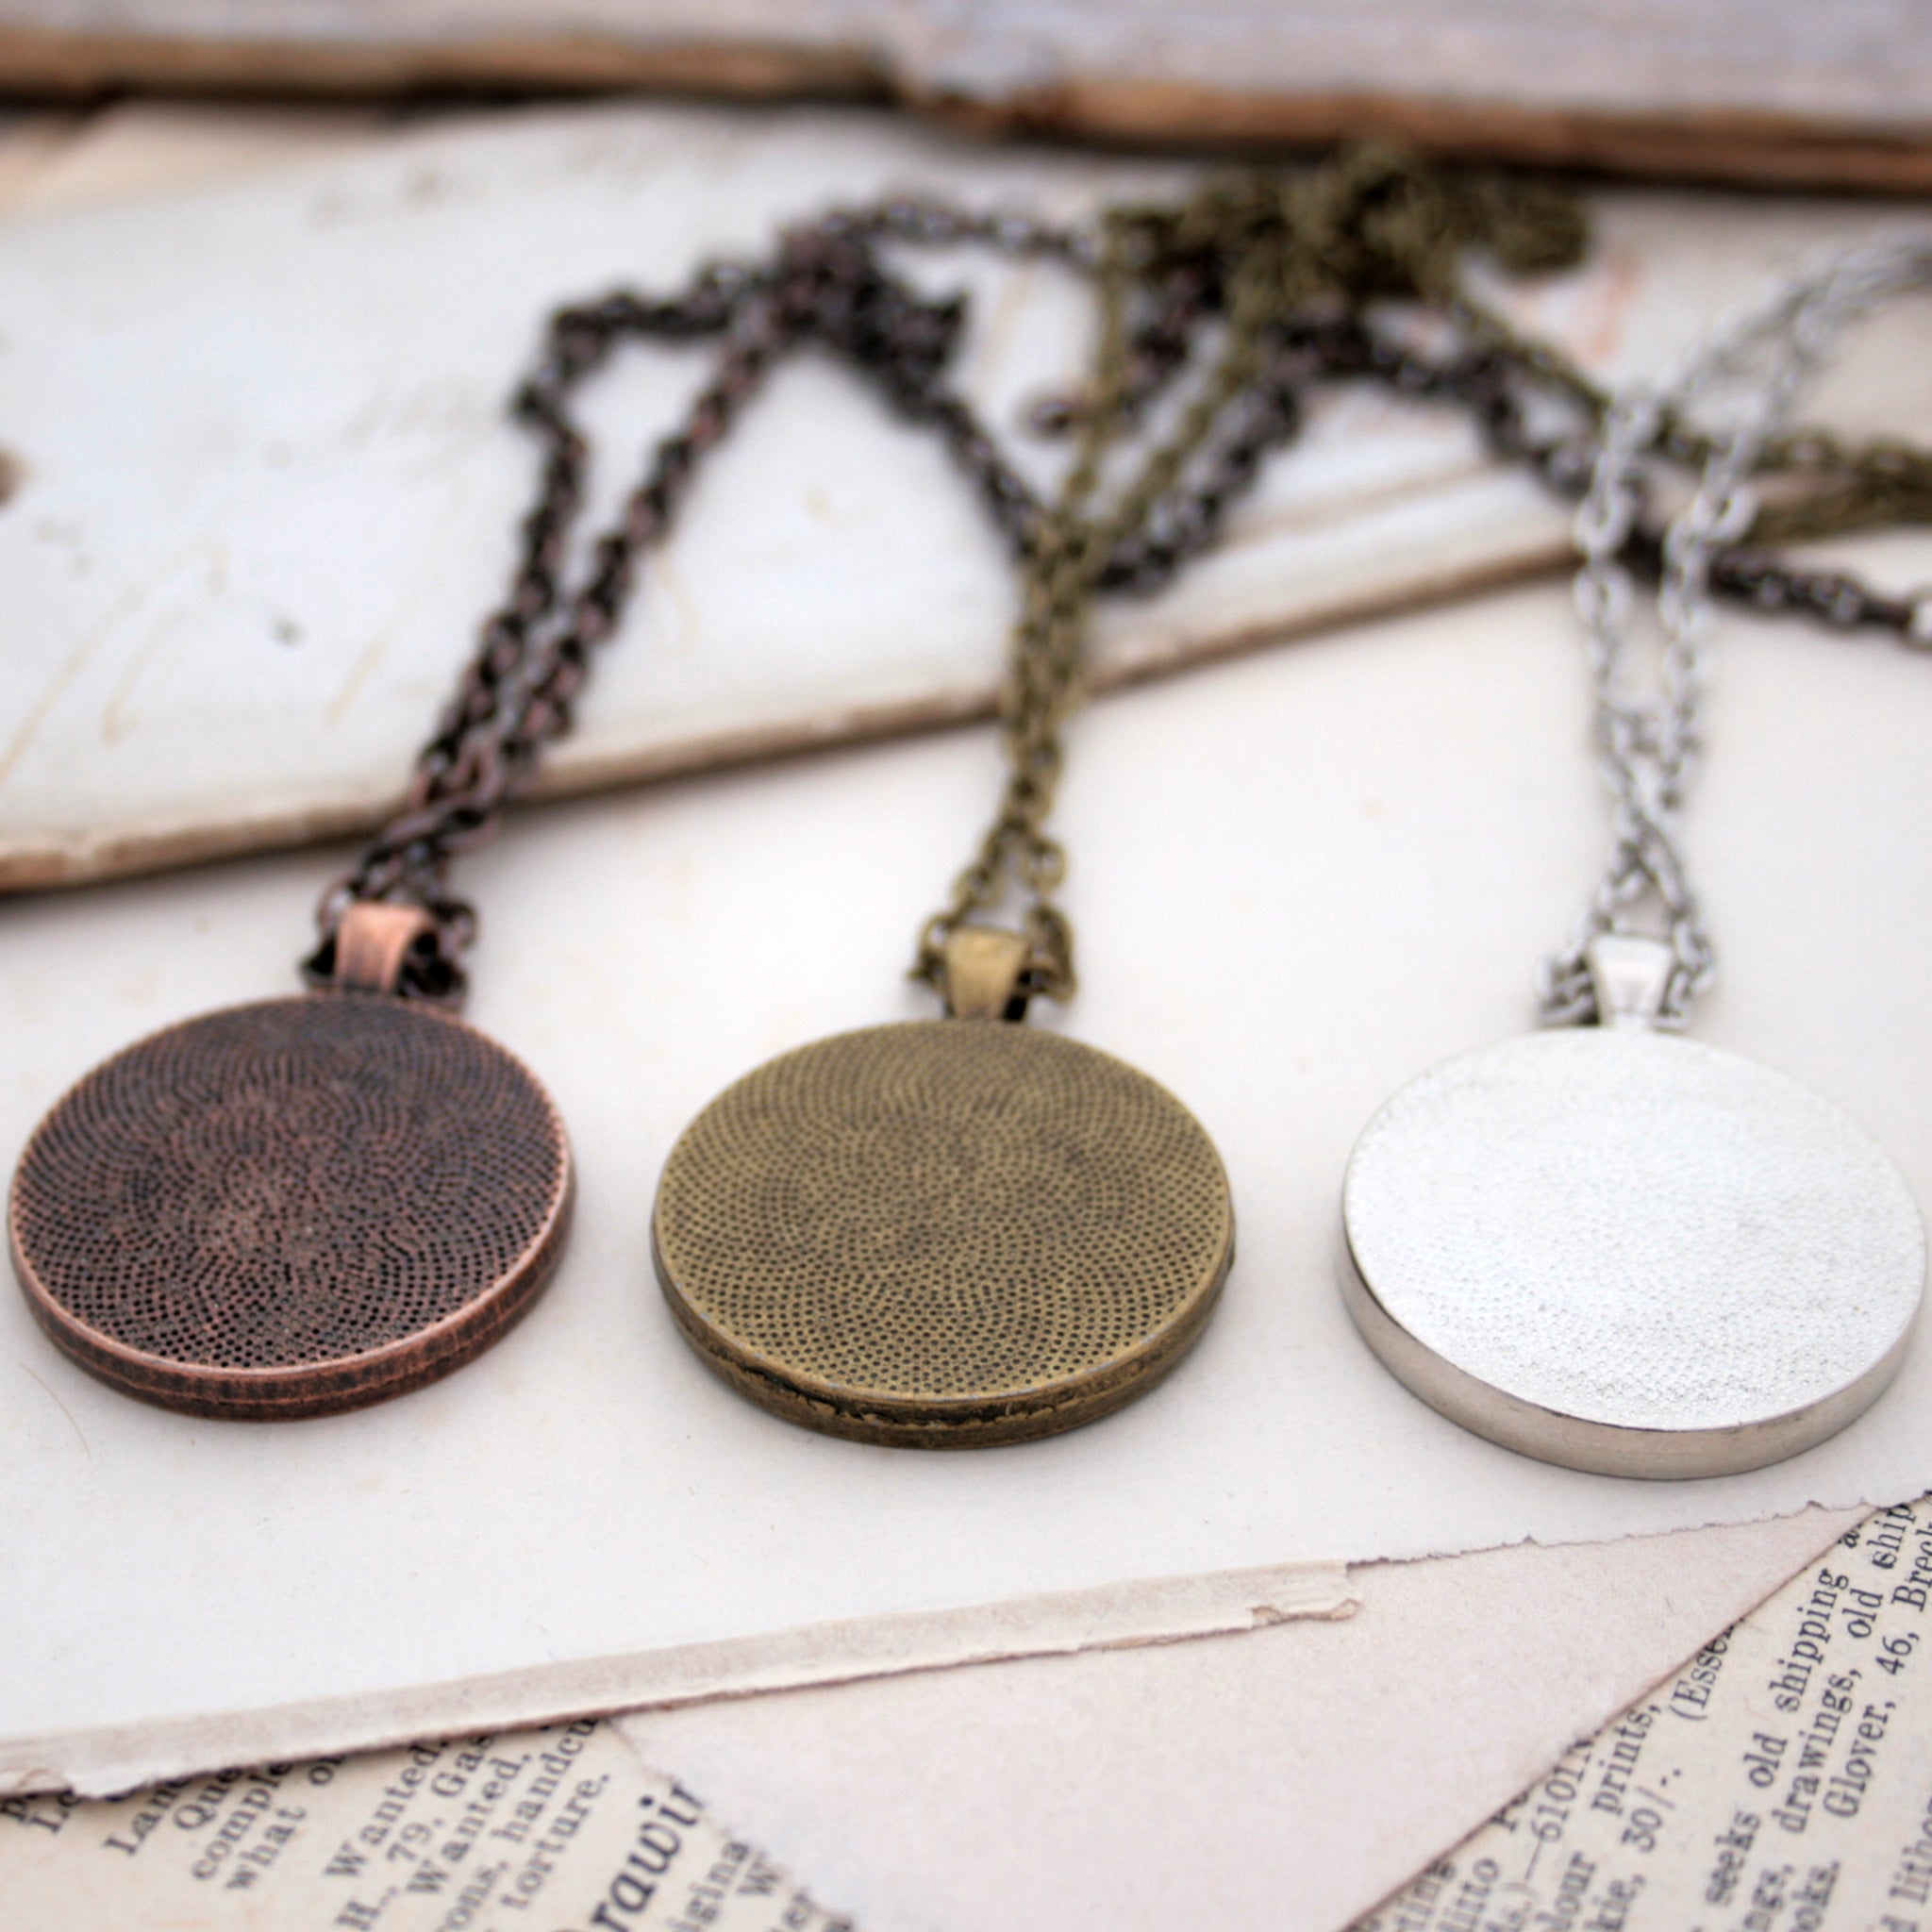 Copper, bronze and silver necklaces on the backside